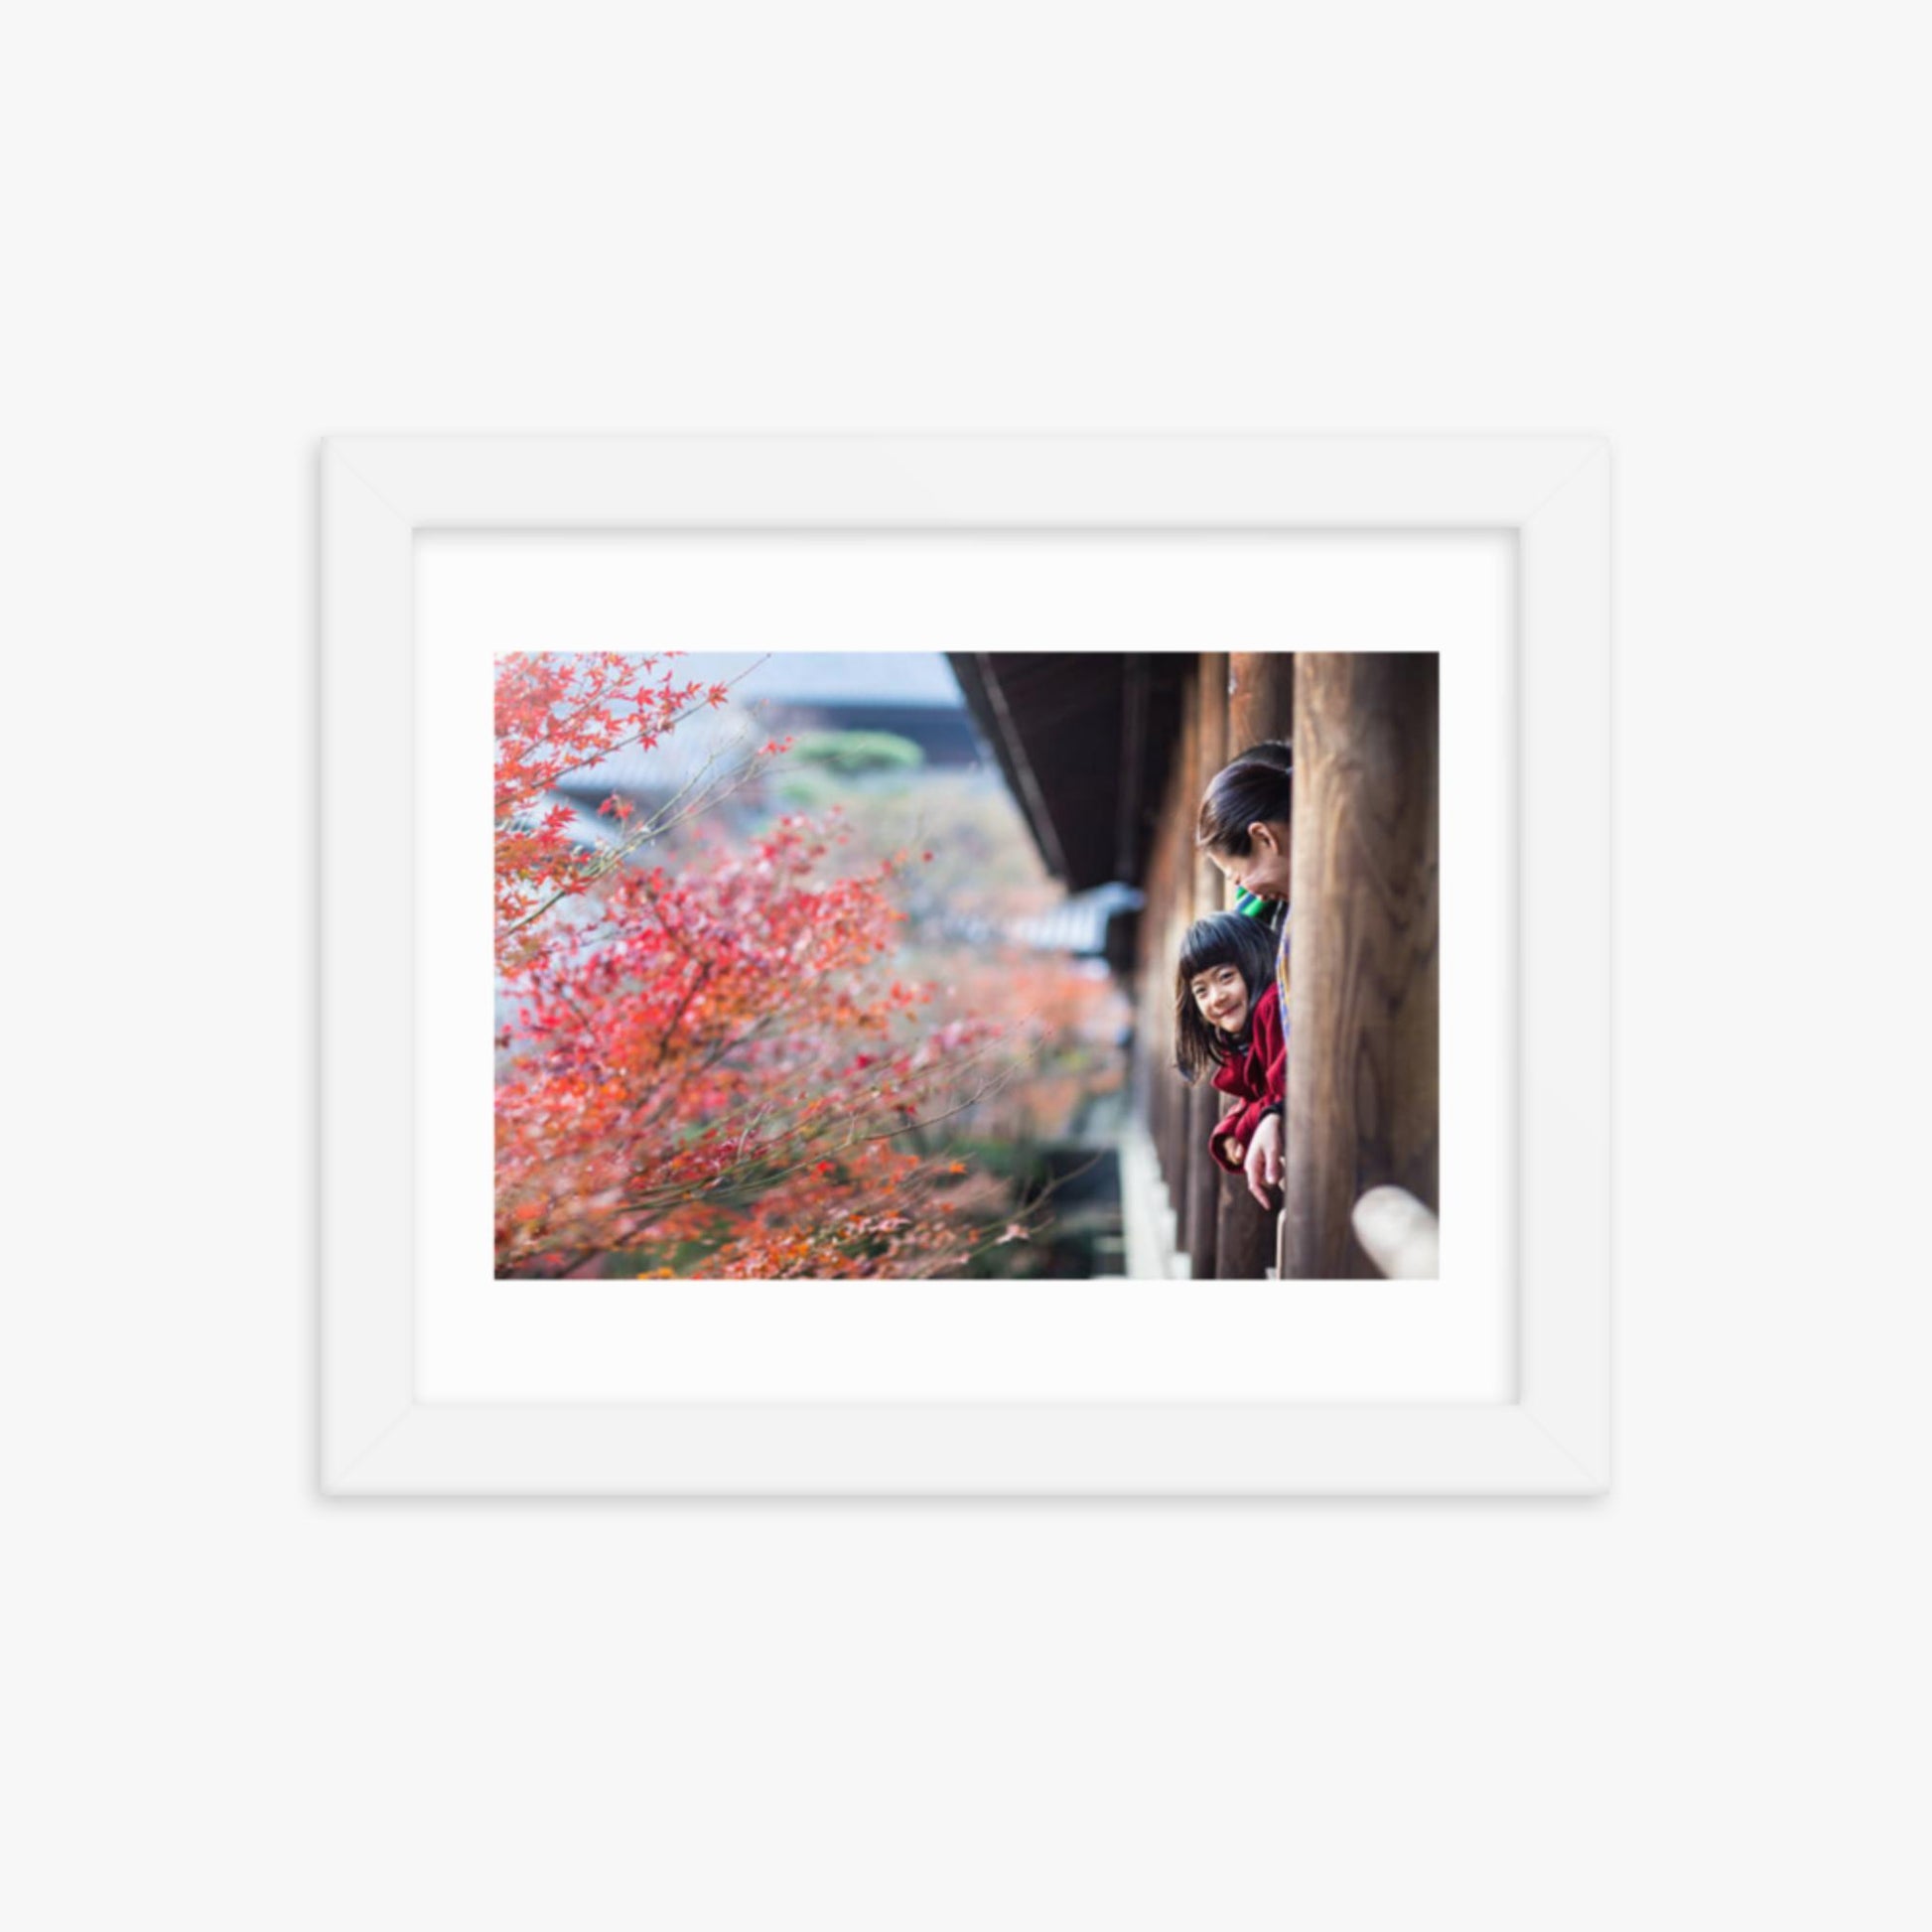 Father, mother and daughter at a temple enjoying autumn leaves 8x10 in Poster With White Frame